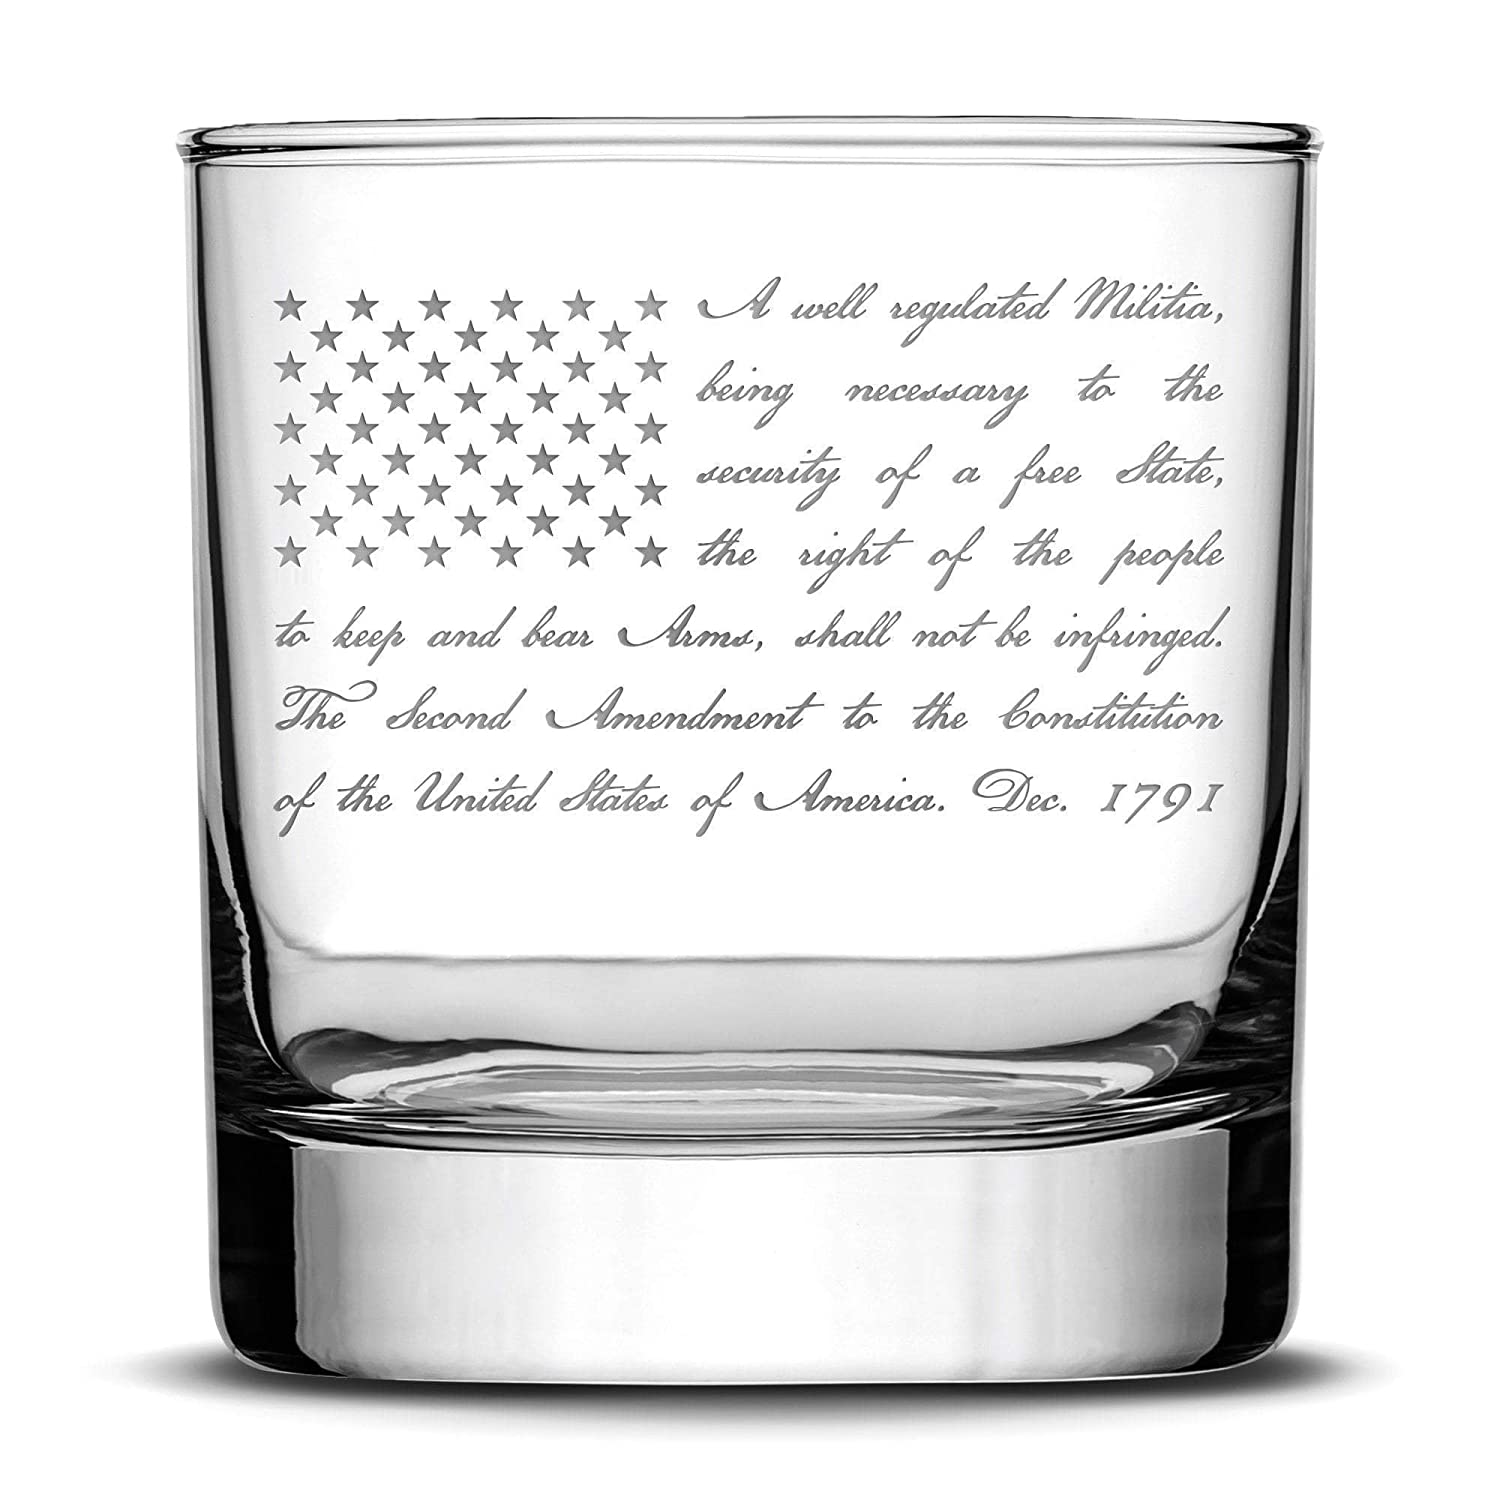 Deep Etch (no color) Premium Whiskey Glass, Hand-Etched Liquor and Rocks Tumbler, 2nd Amendment Flag, Made in USA, 11oz by Integrity Bottles